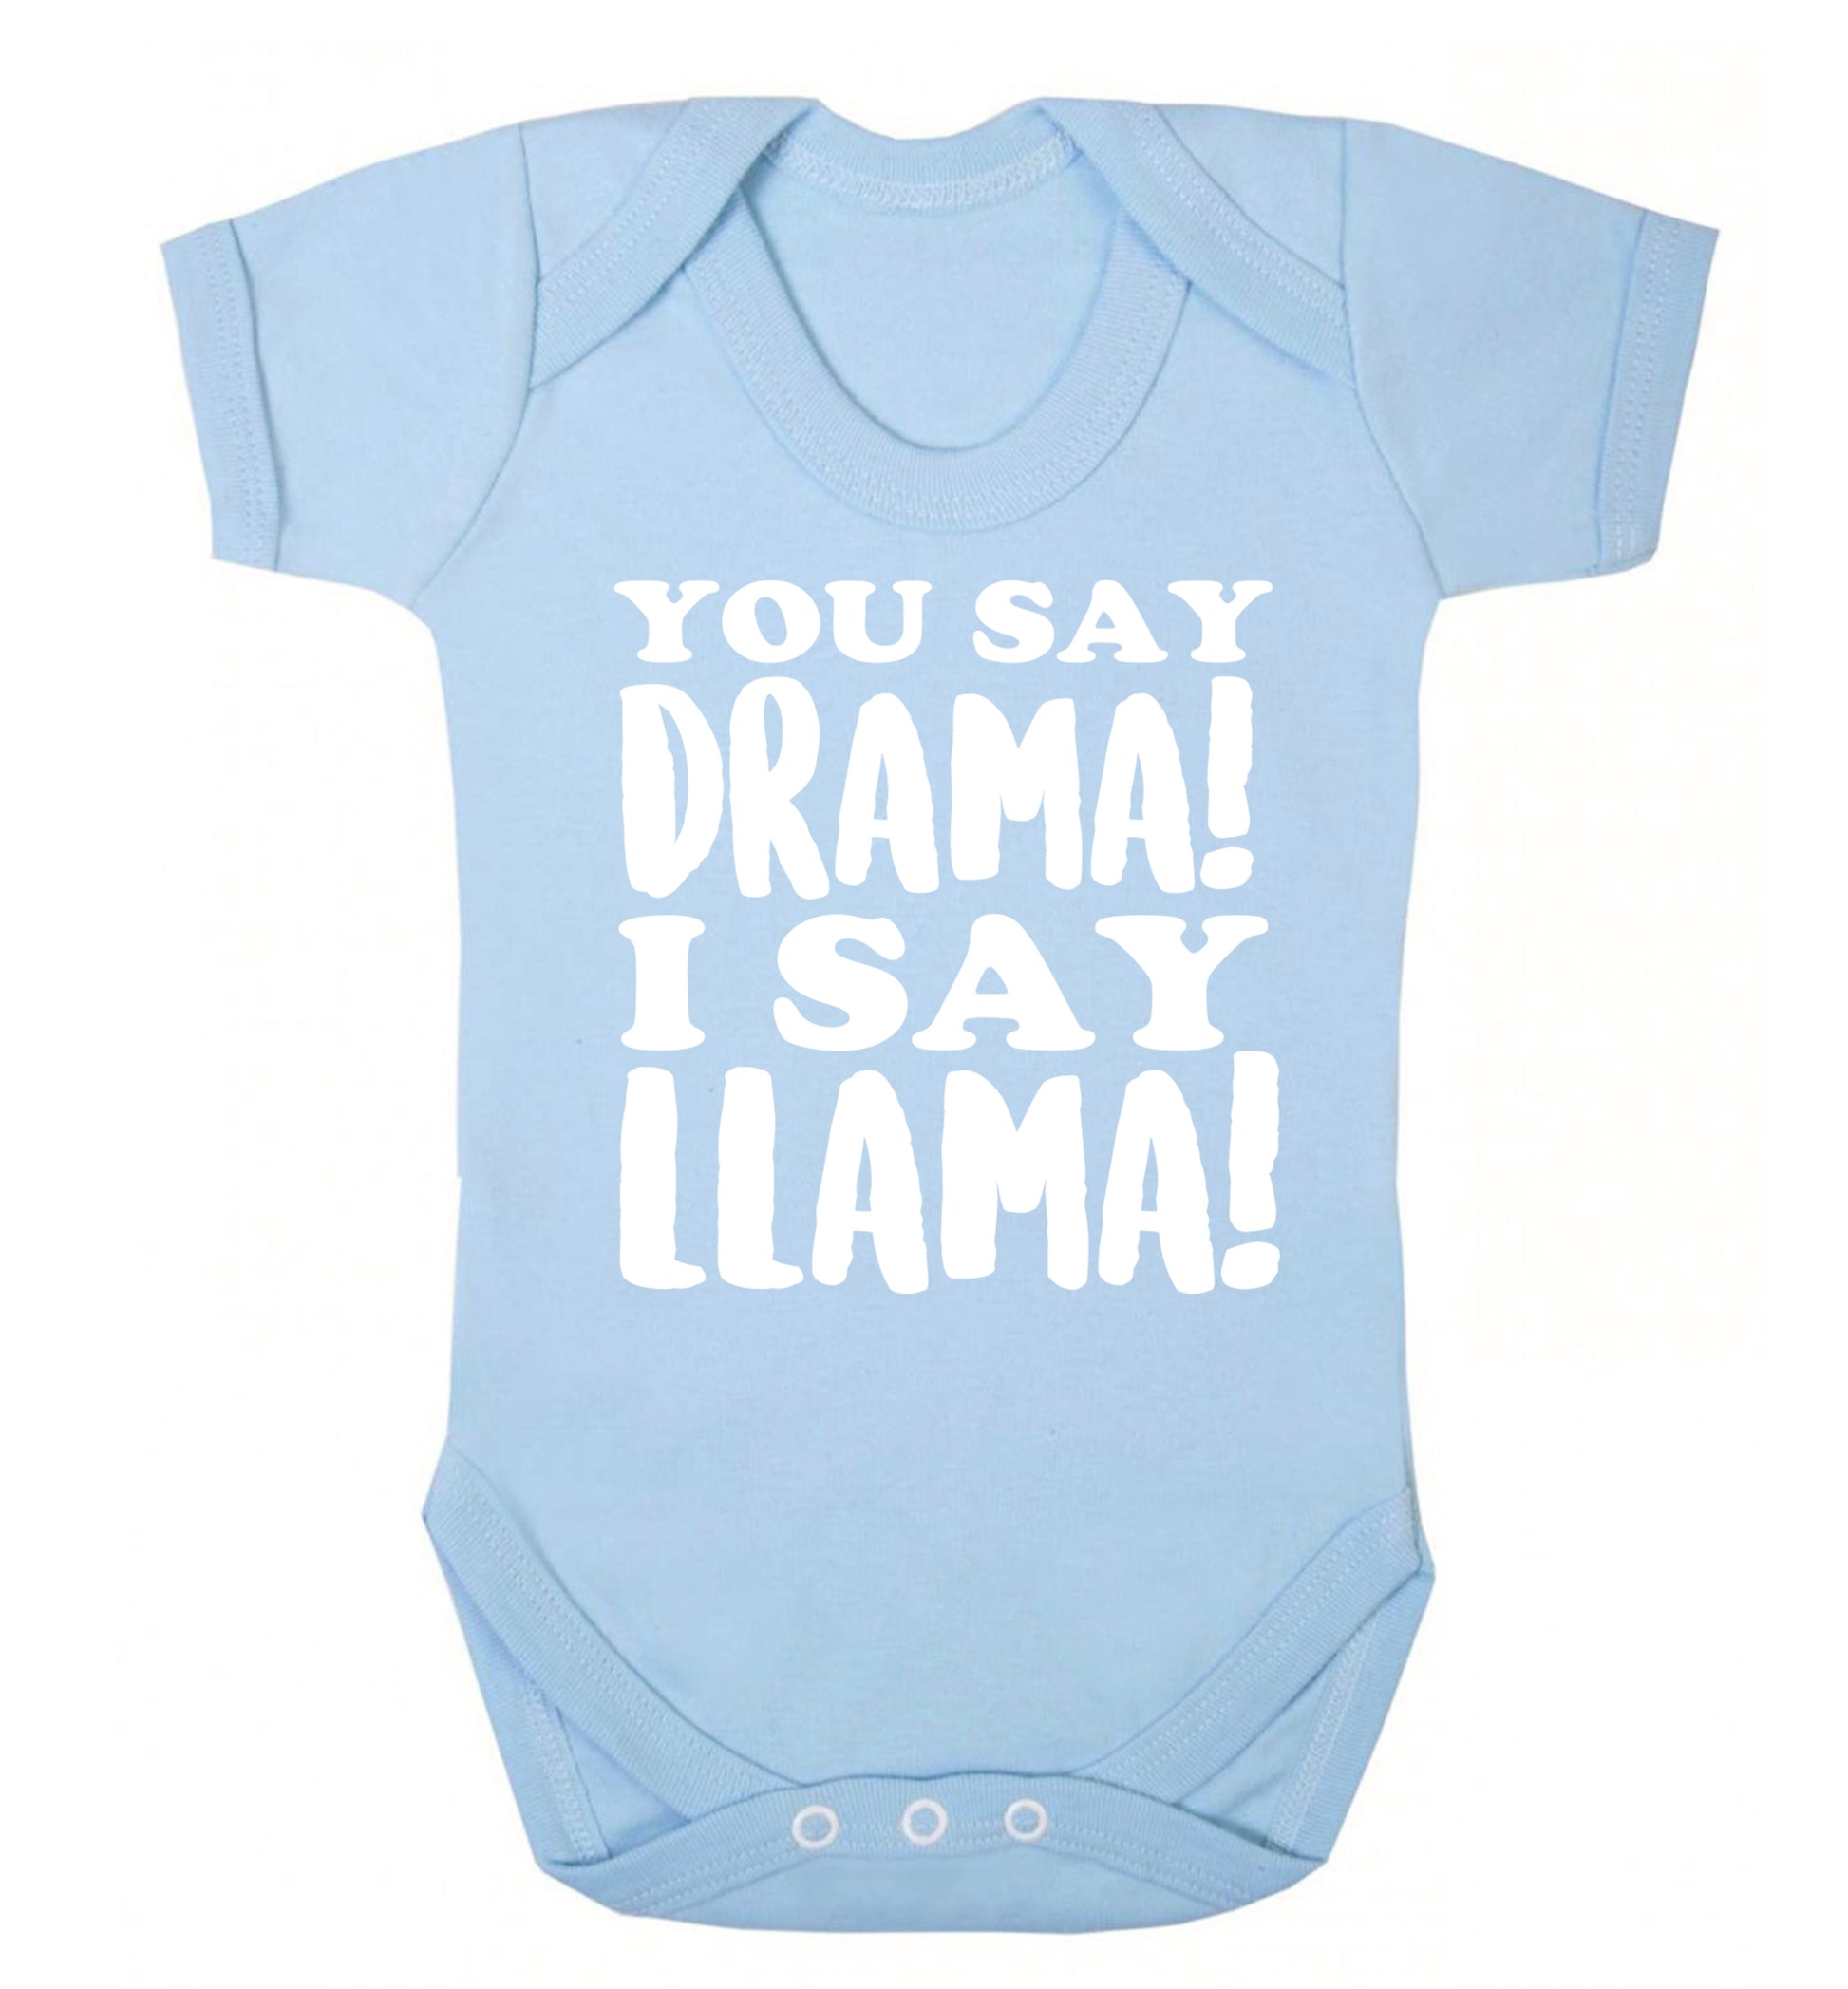 You say drama I say llama! Baby Vest pale blue 18-24 months